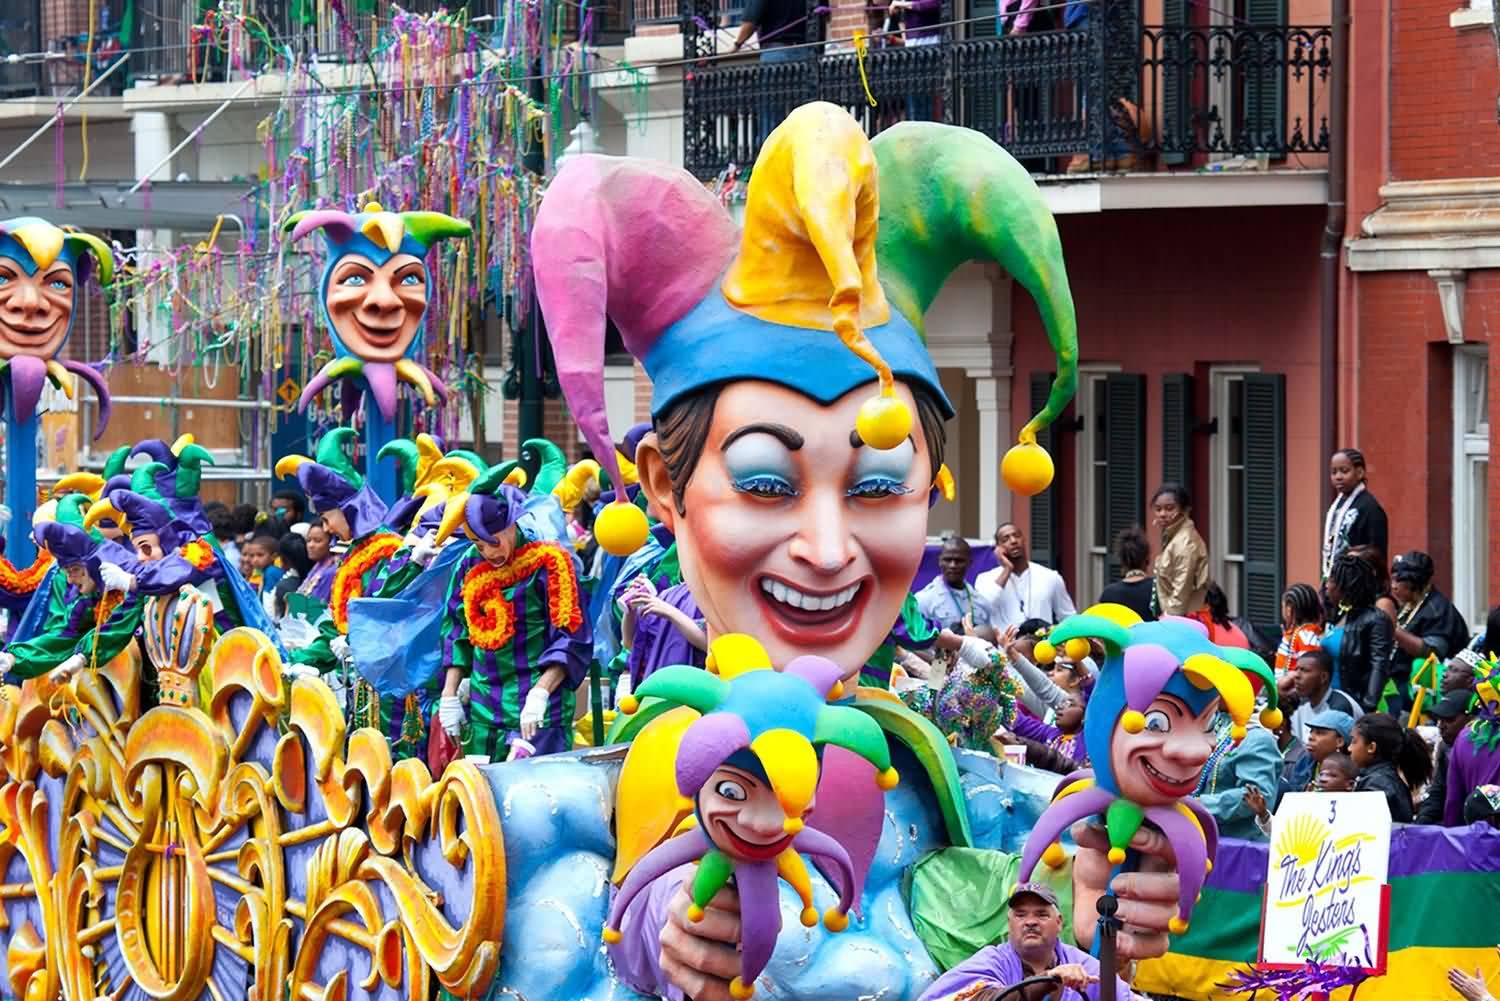 Jester Clown Floats At The Mardi Gras Parade